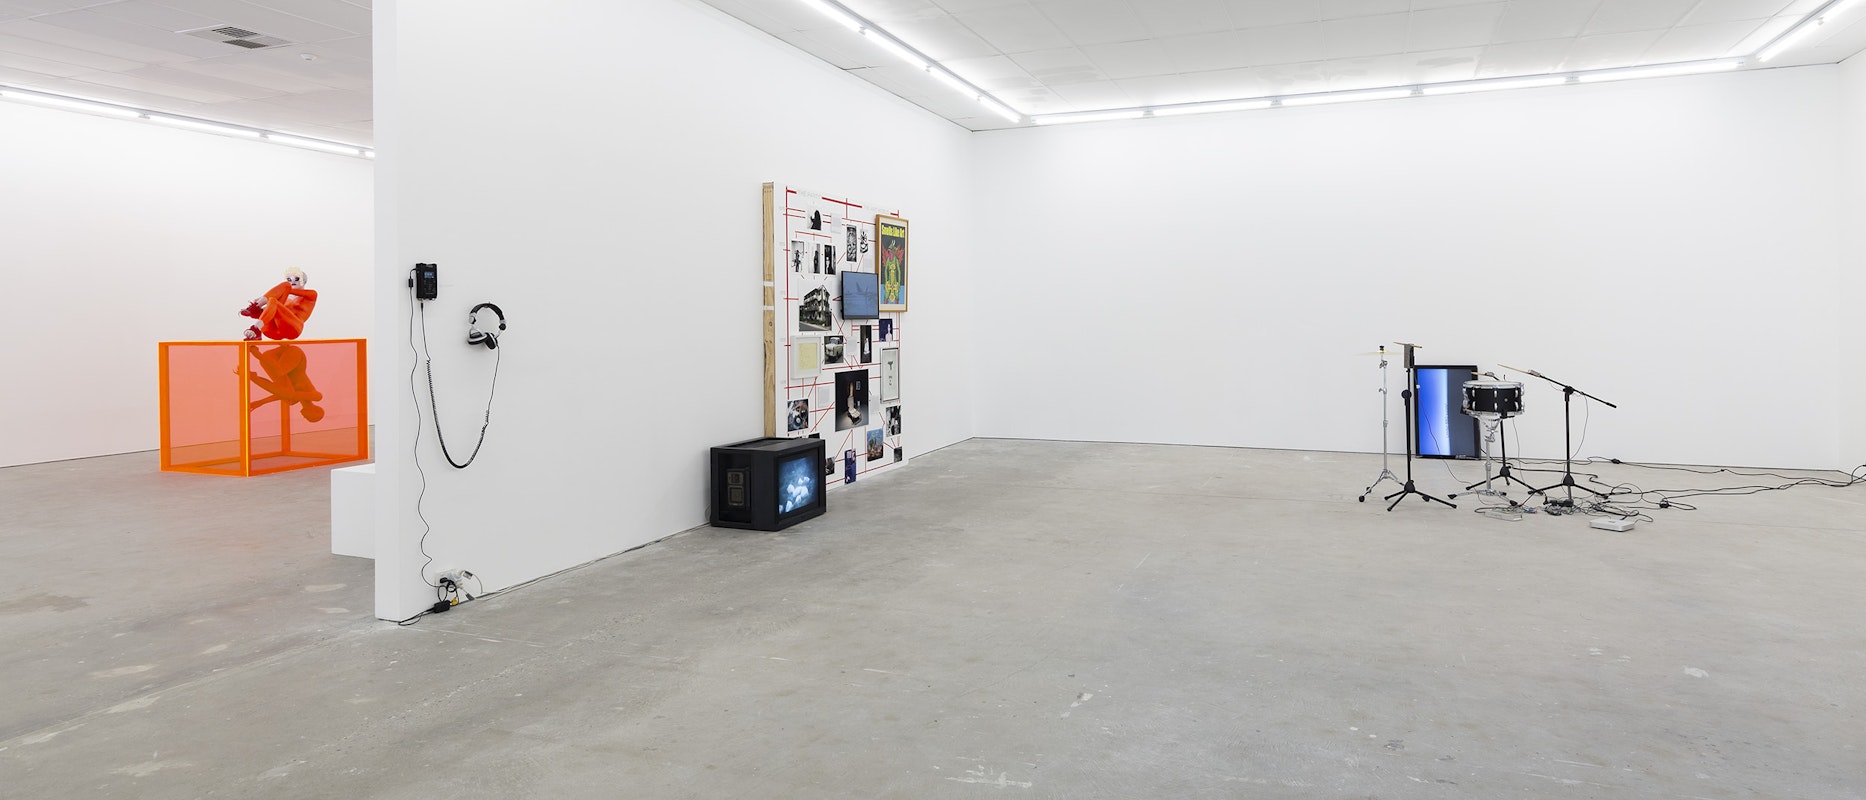 Installation view of Stupid As, curated by Alex Gawronski, featuring work by Justene Williams, Del Lumanta, The Estate of Quinto Sesto and Sean Kerr, presented at Gertrude Contemporary 2024. Photo: Christian Capurro